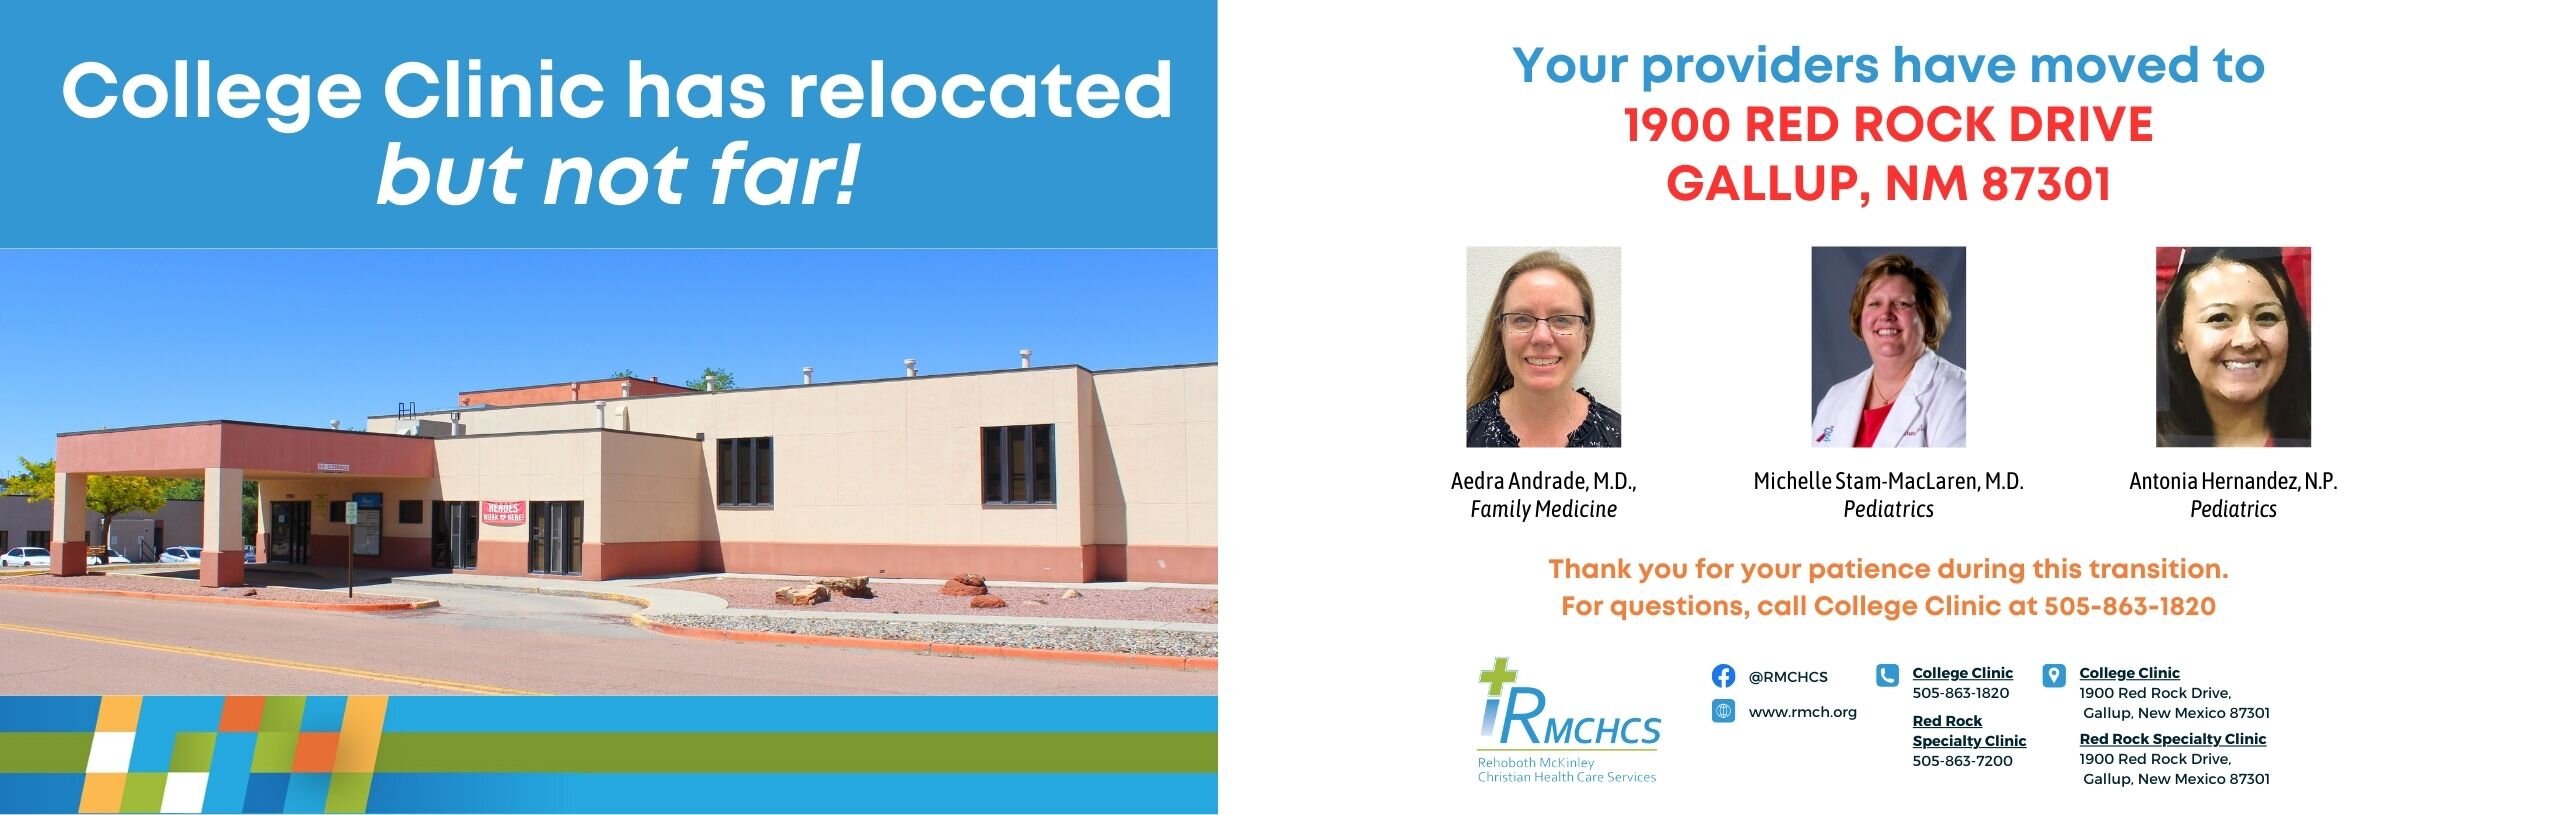 College Clinic is relocating but not far. Your Providers are moving to 1900 Red Rock Drive, Gallup NM 87301